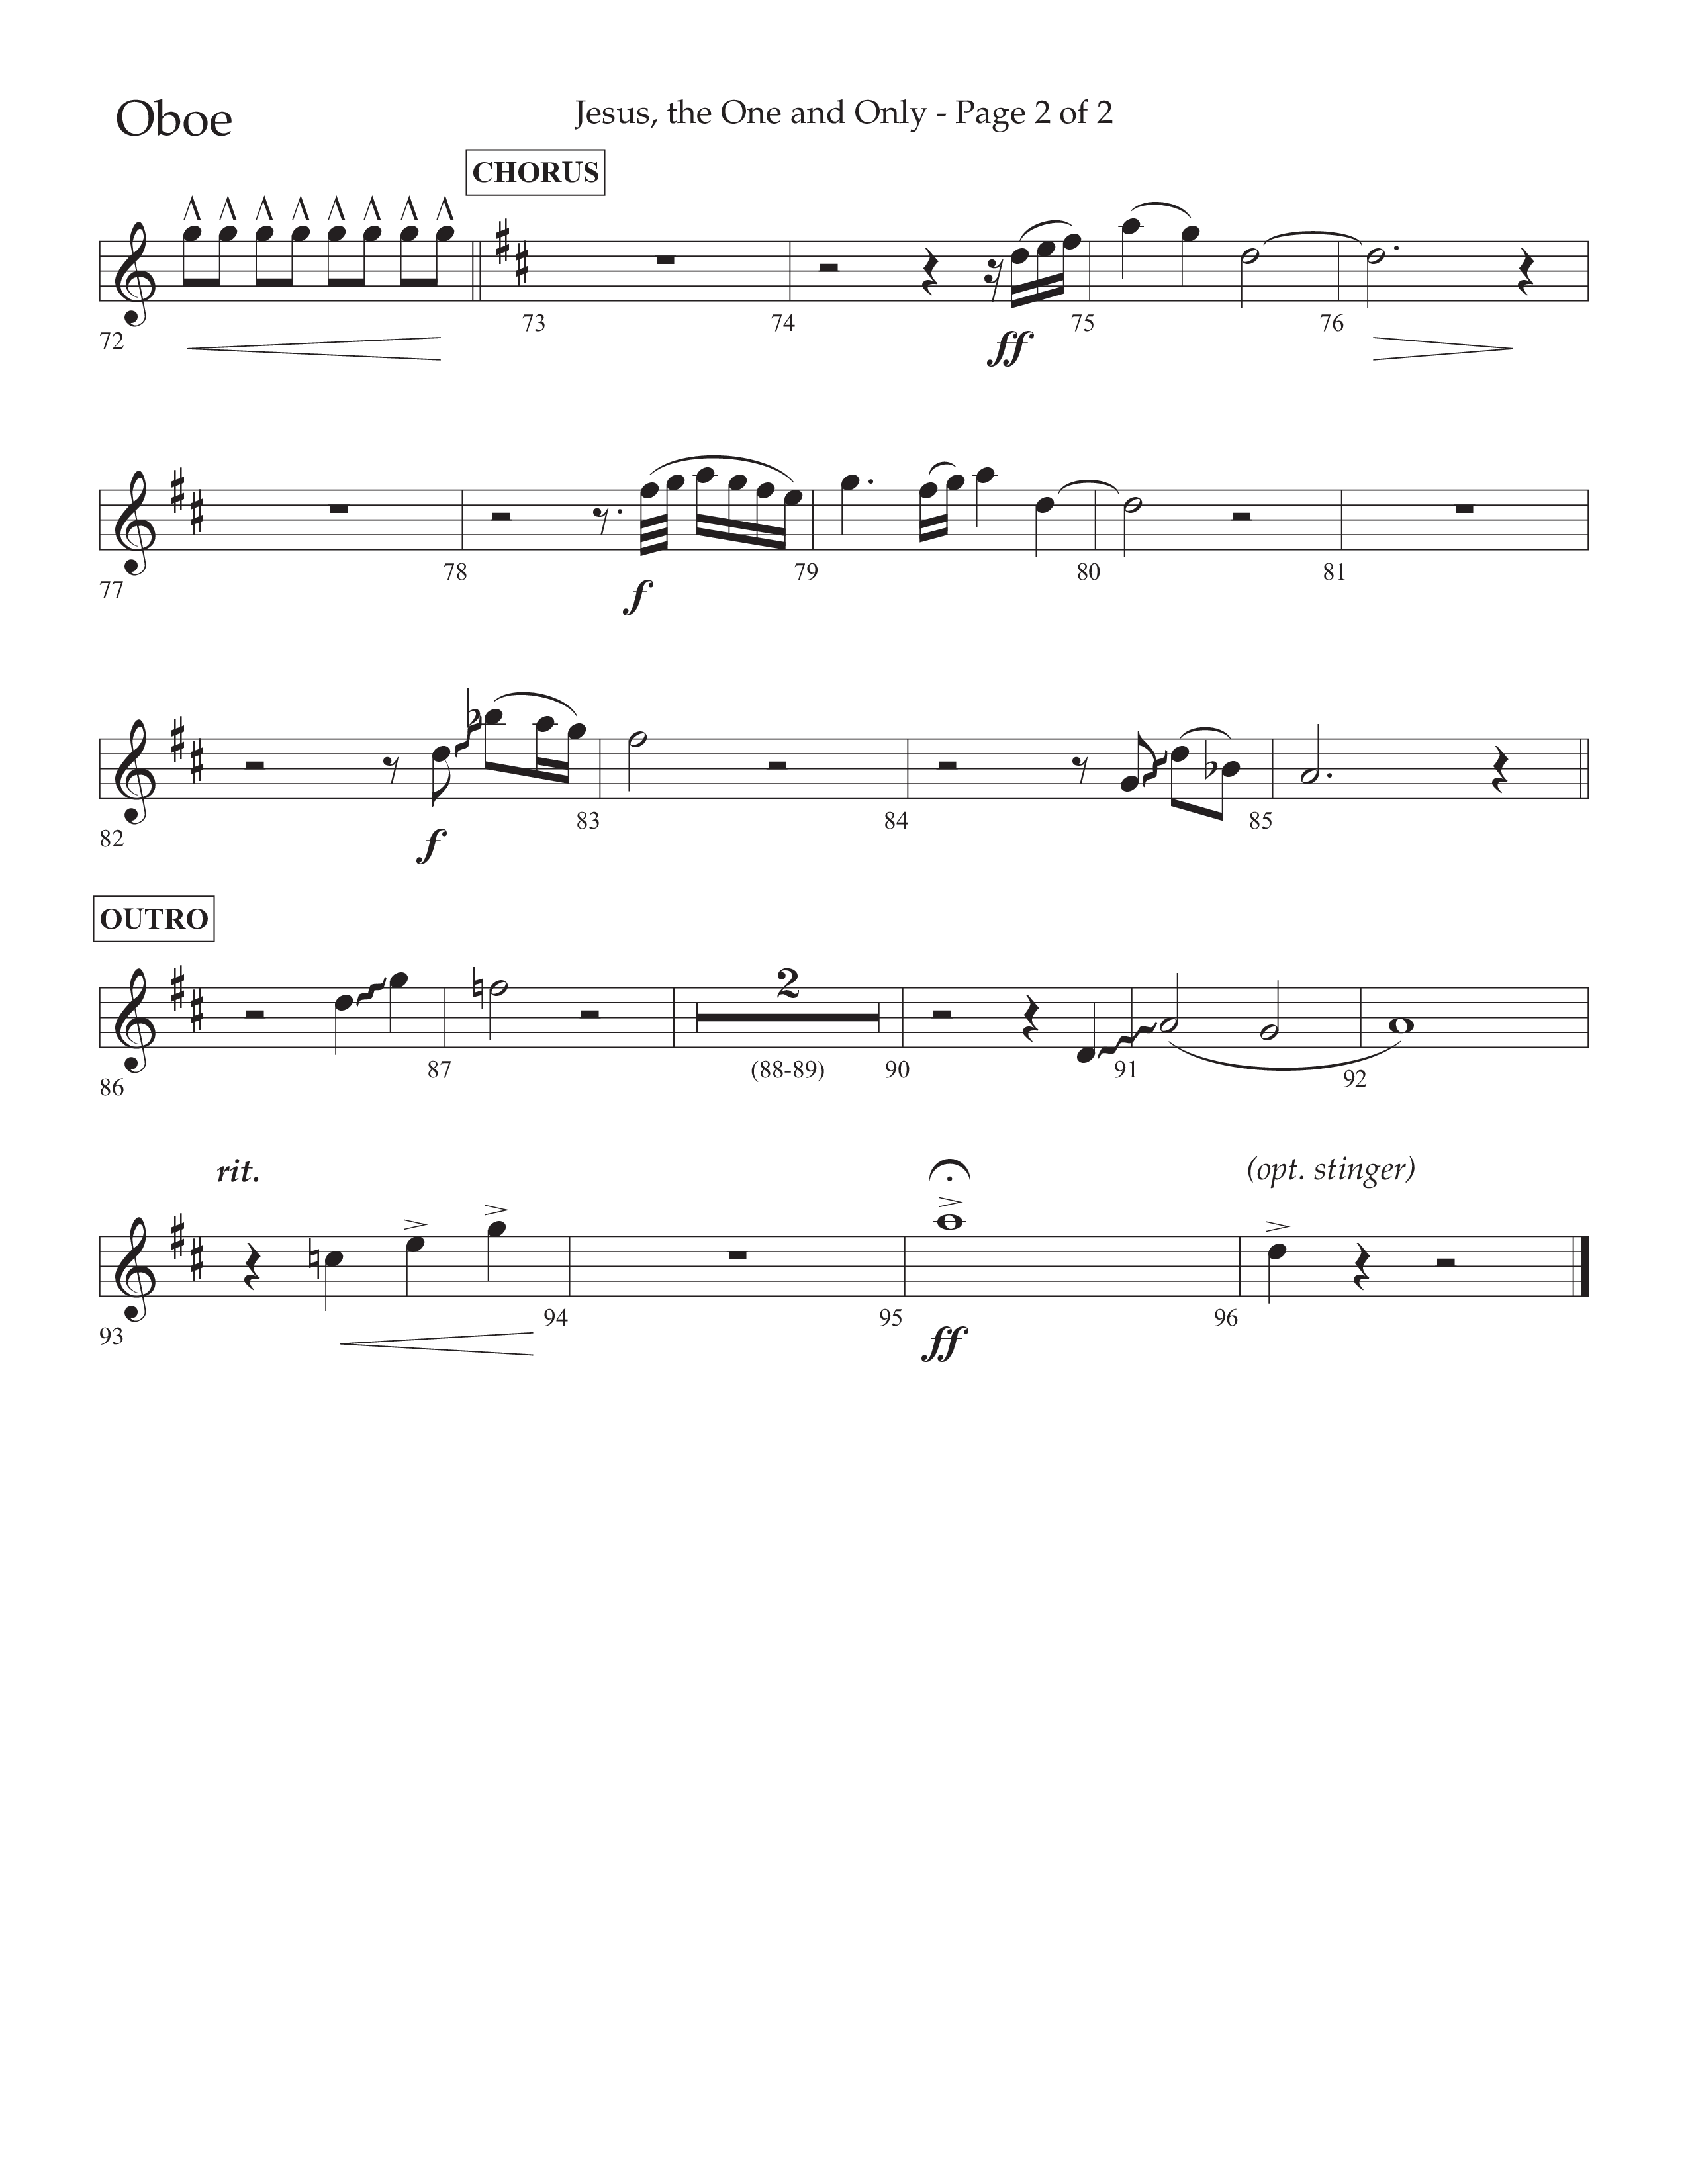 Jesus The One And Only (Choral Anthem SATB) Oboe (Lifeway Choral / Arr. John Bolin / Arr. Don Koch / Orch. David Shipps)